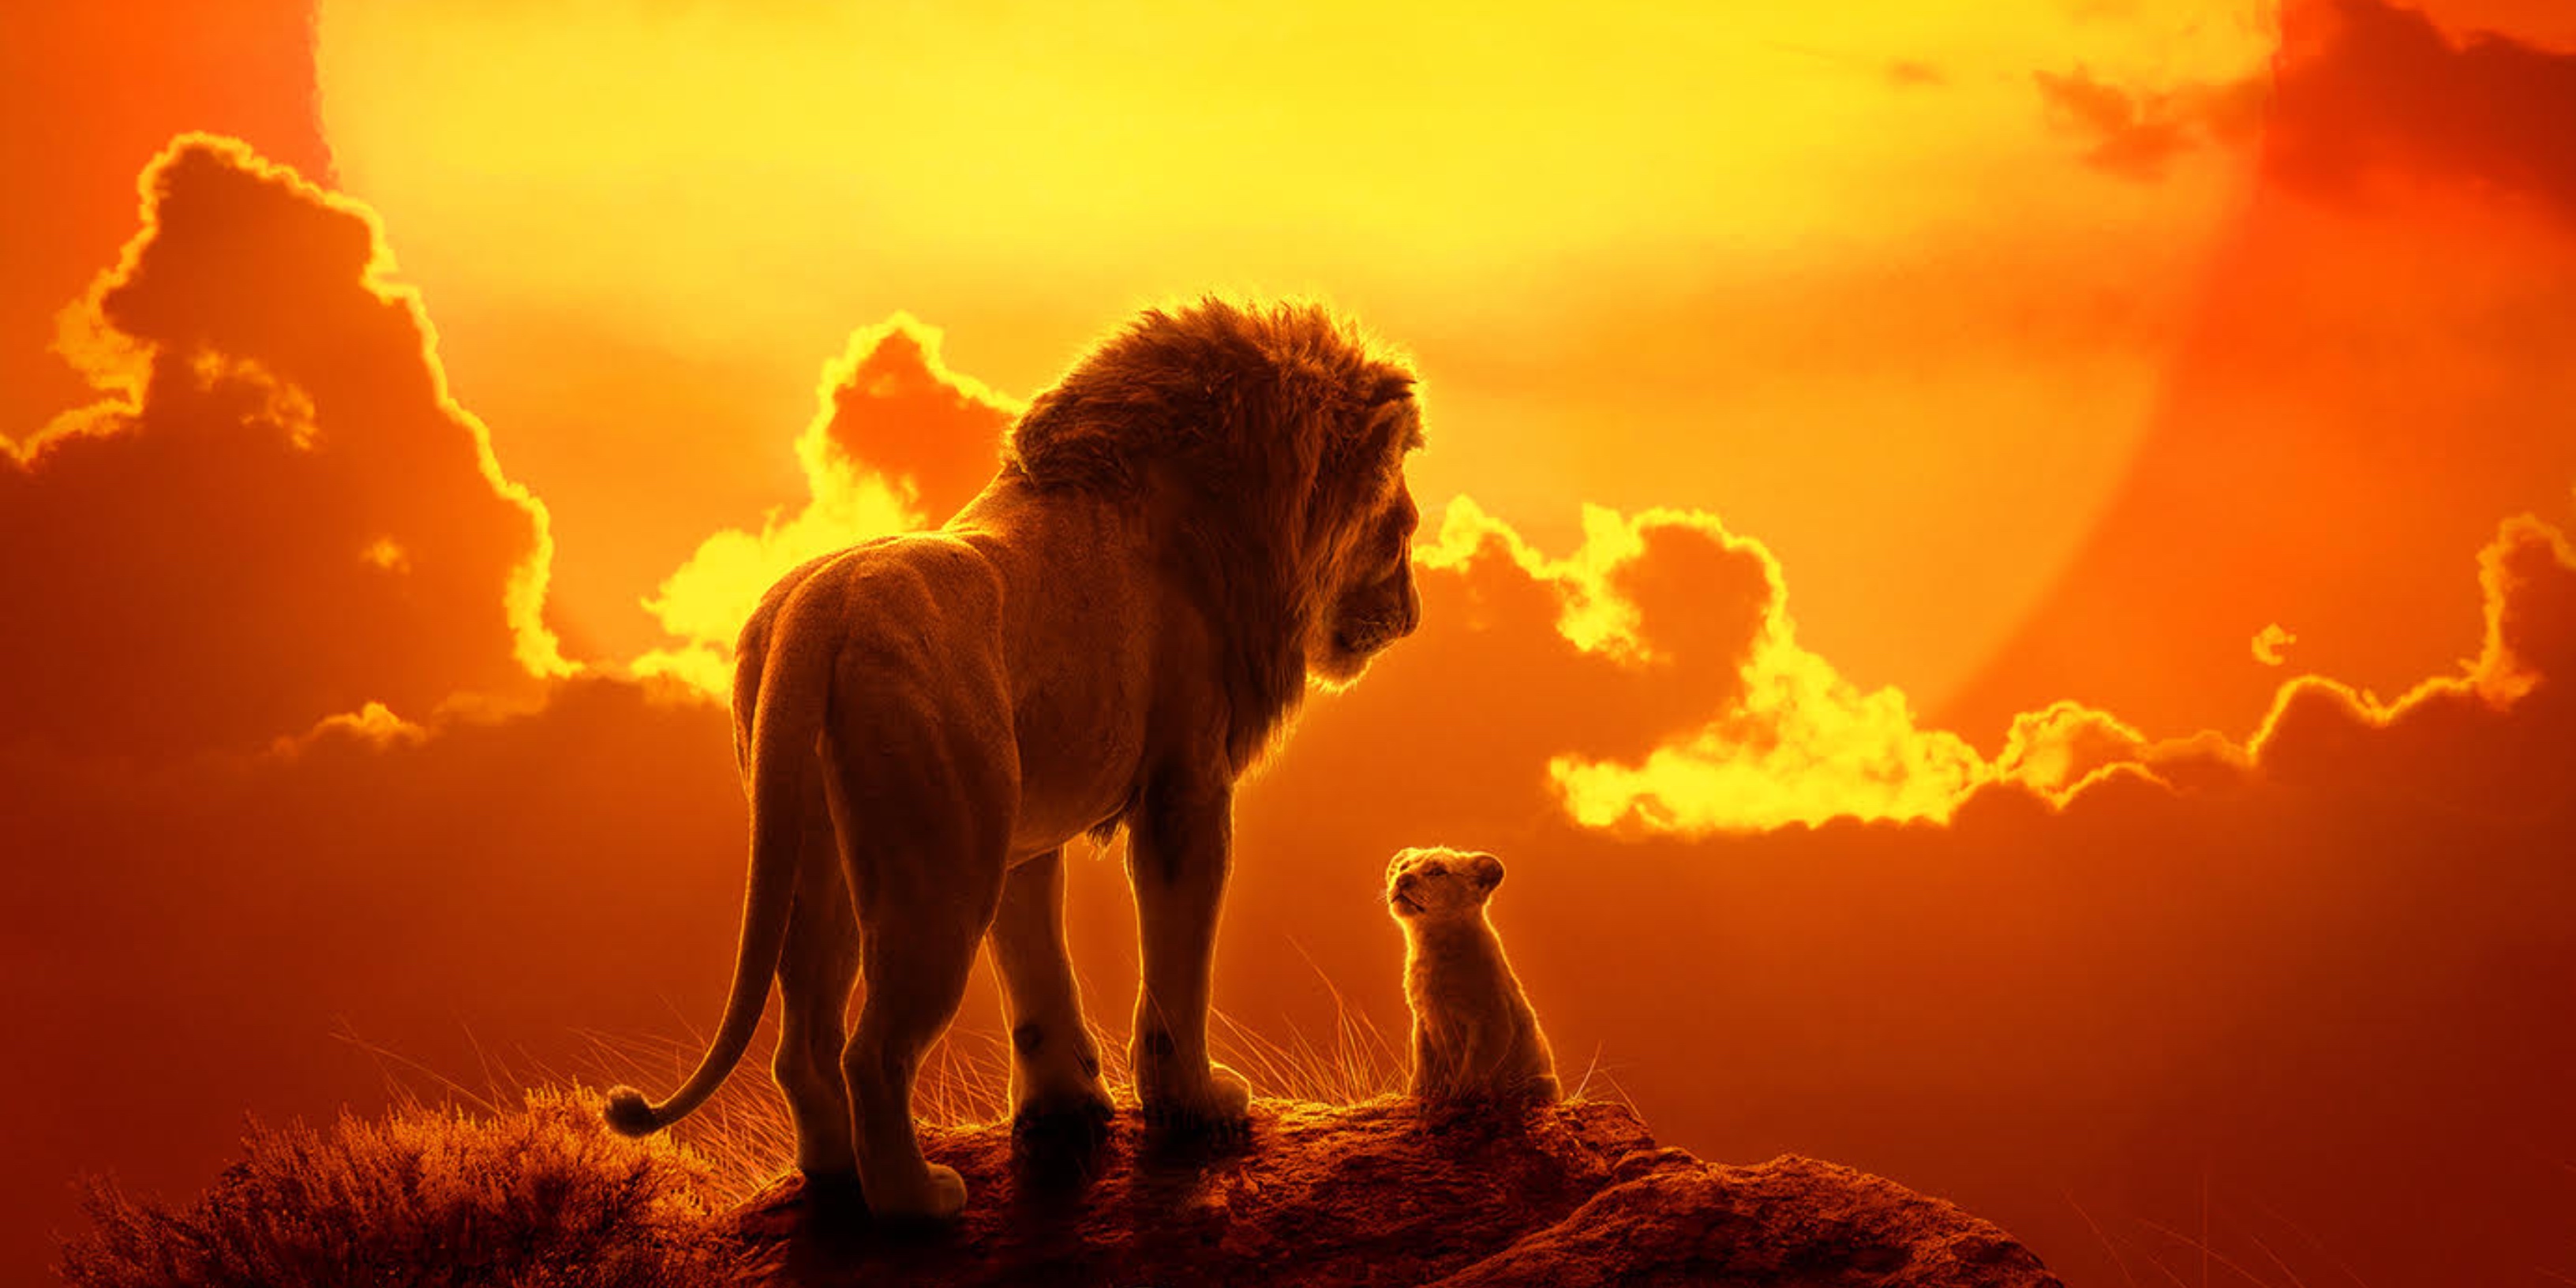 ‘The Lion King’ Reigns Over ‘Frozen’ As Disney’s New Highest Grossing Animated Film